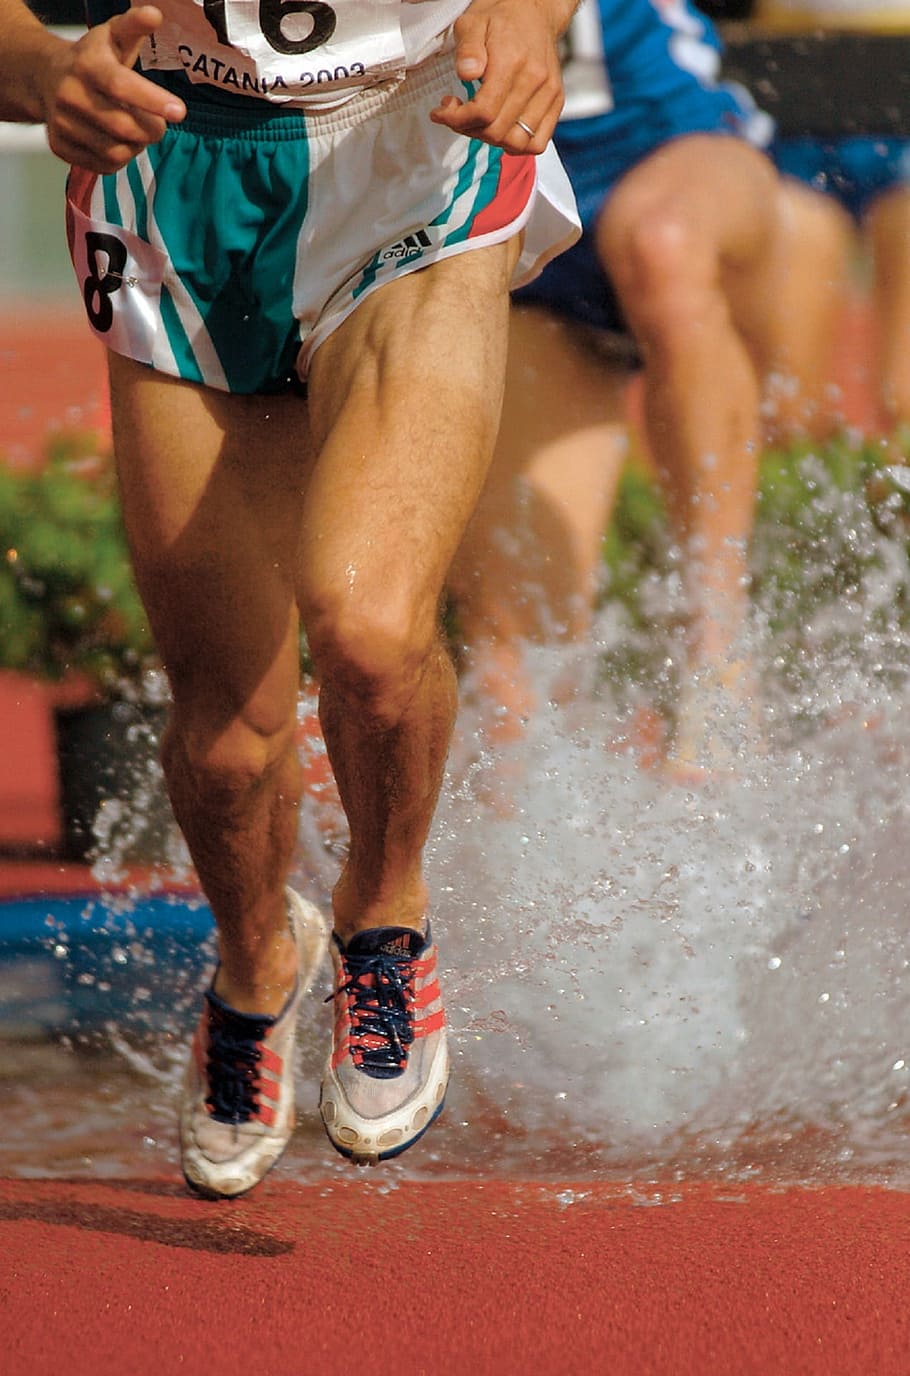 man jogging, runners legs, competition, race, feet, water, shoes